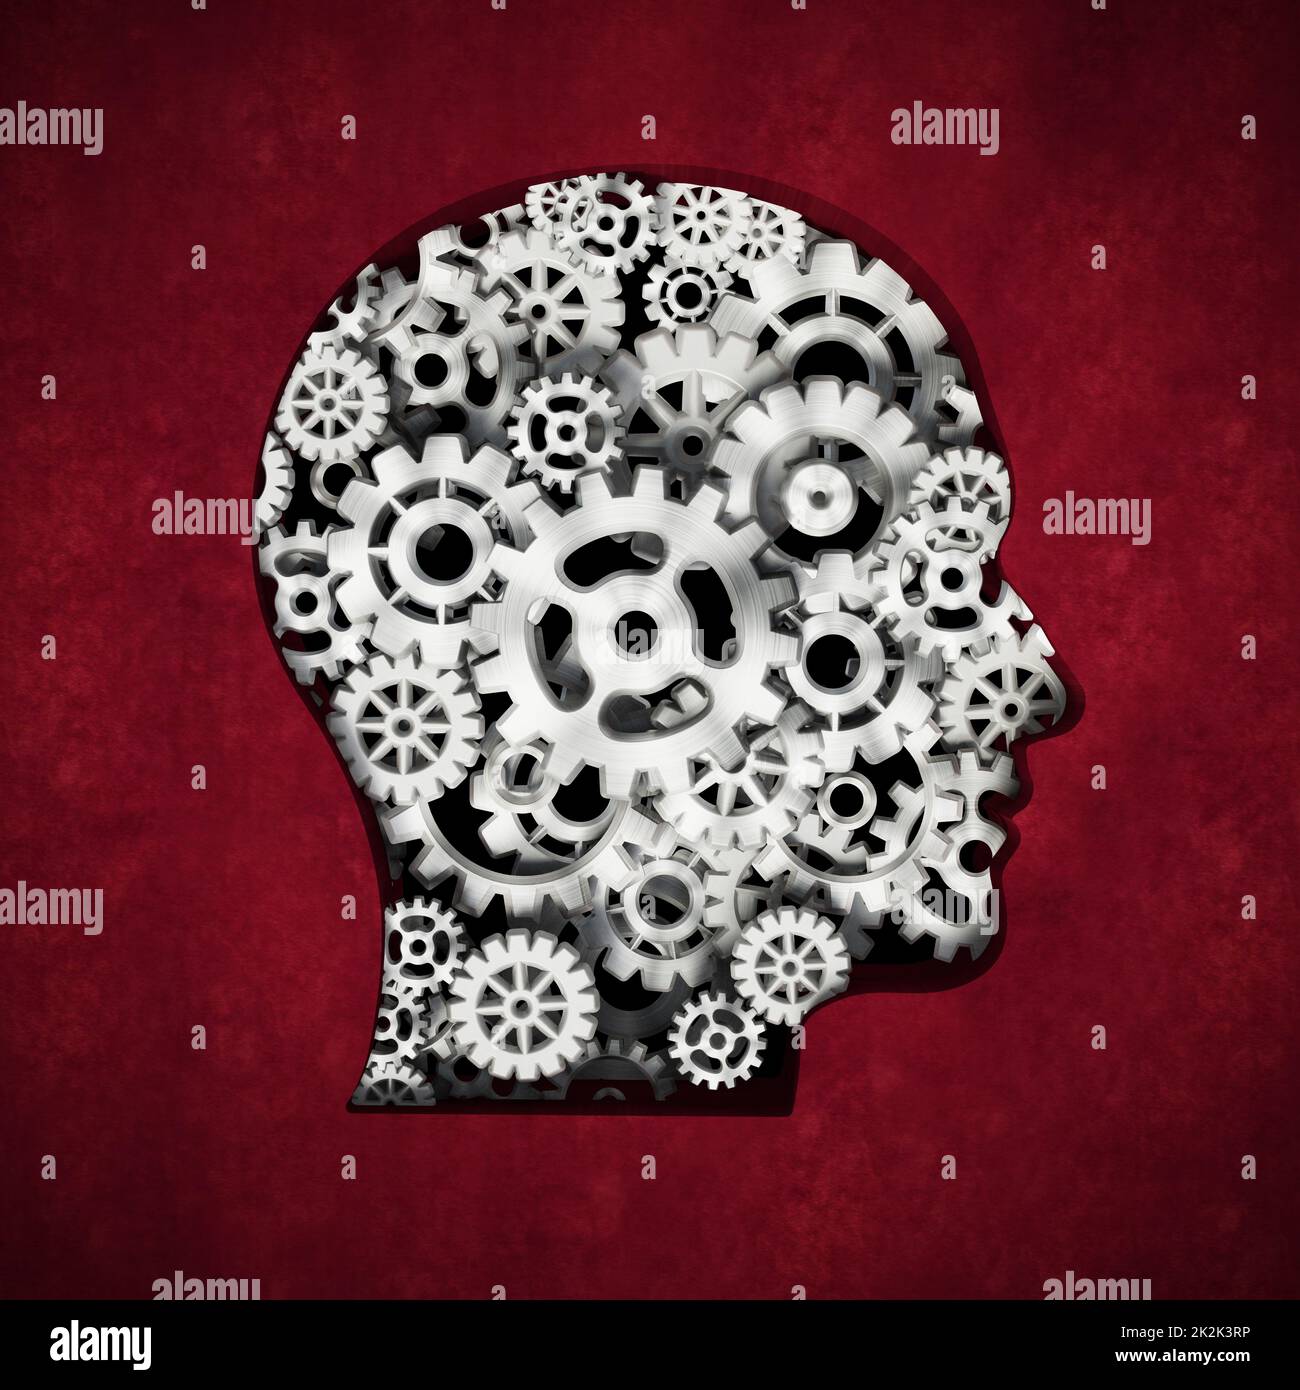 Metal cogs forming head shape. 3D illustration Stock Photo